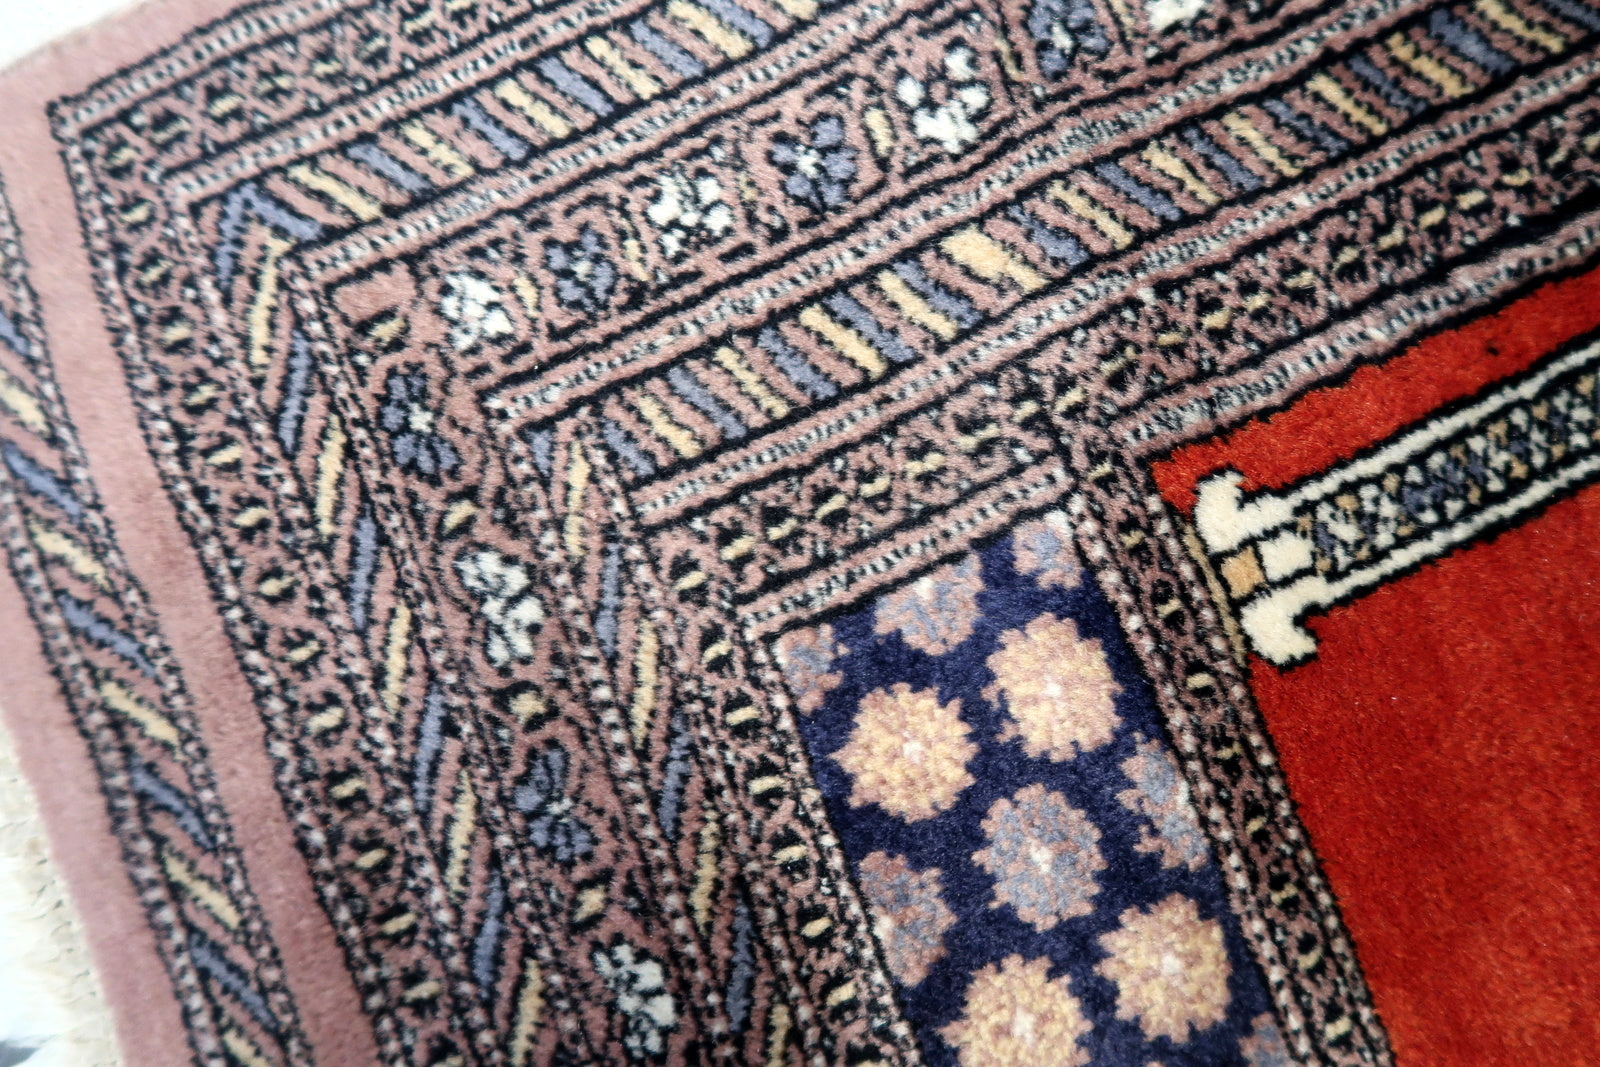 Close-up of the outermost layer boasting detailed artwork reminiscent of traditional craftsmanship